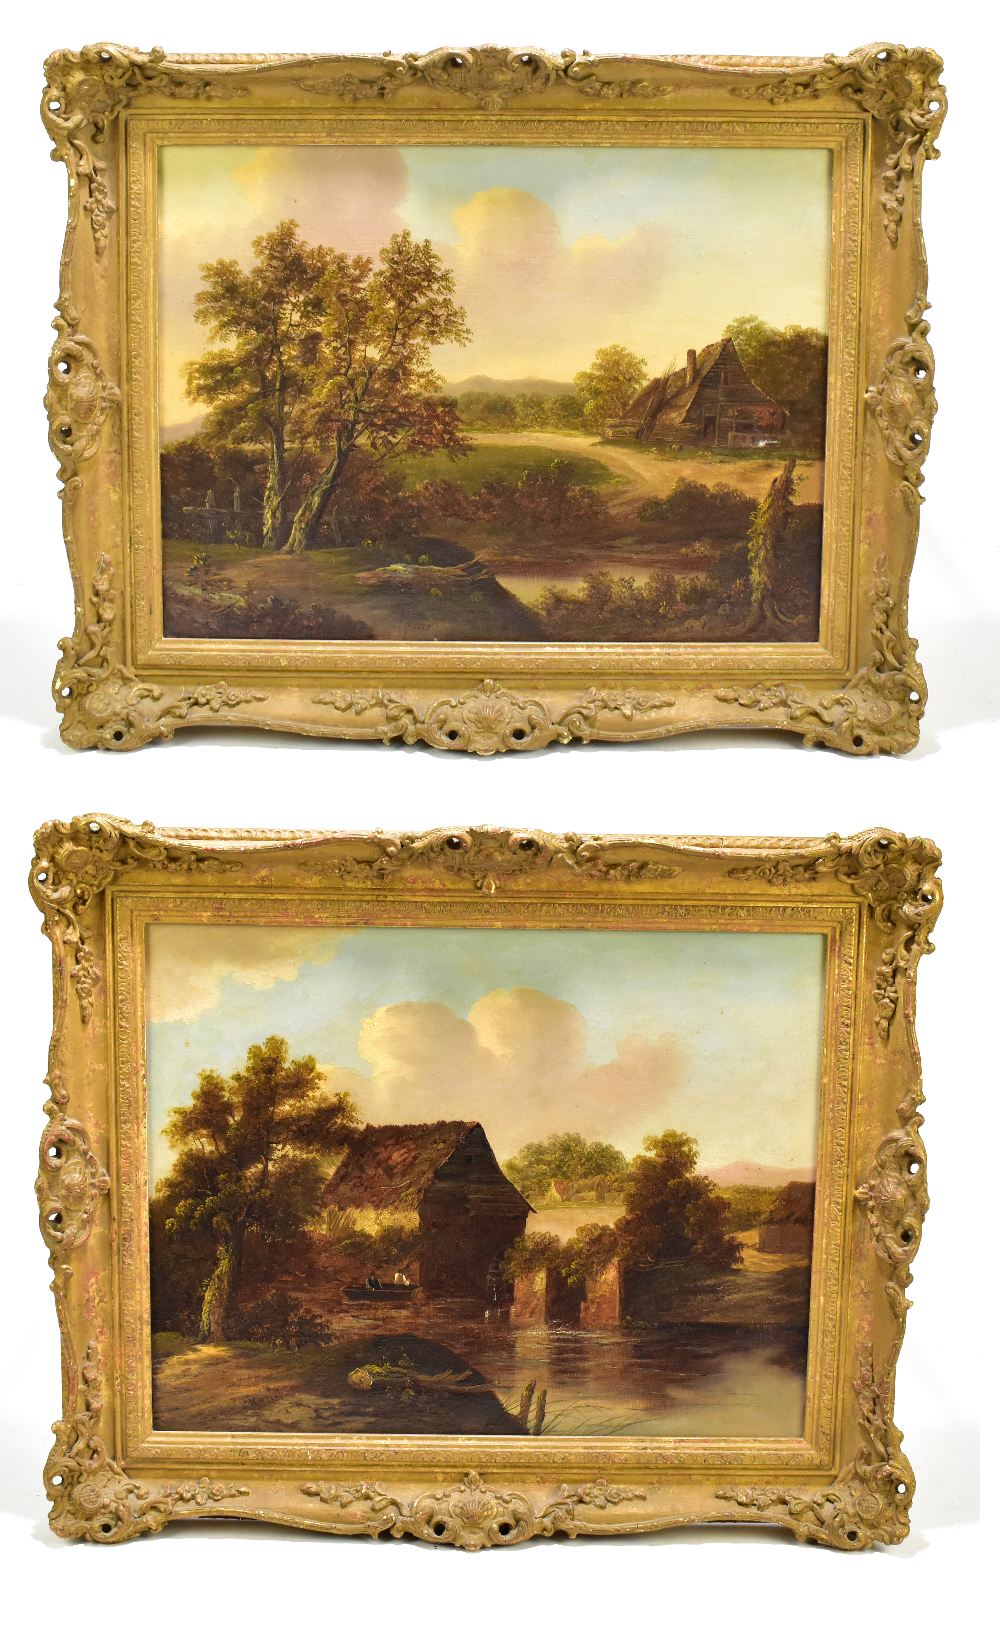 C MORRIS; a pair of oils on canvas, rural landscapes with mill and cottage, both signed, 35 x